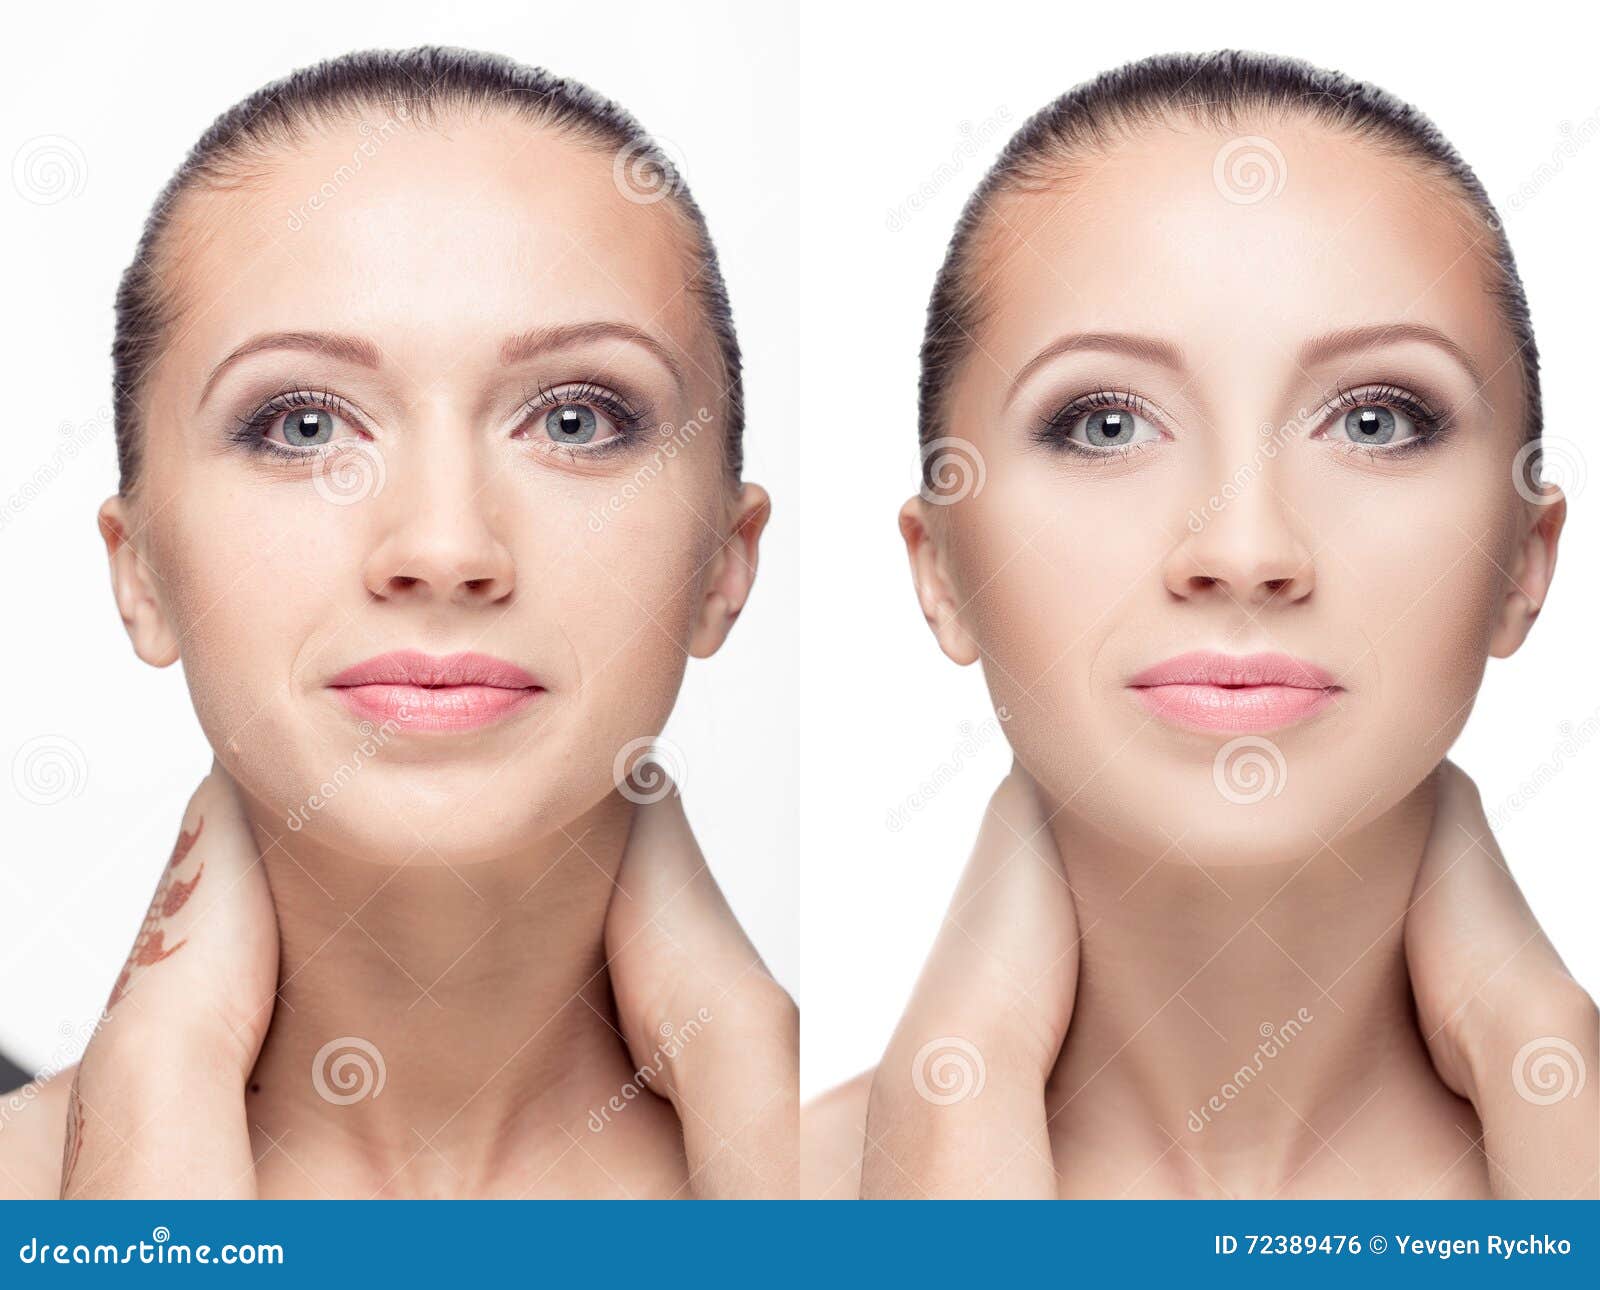 woman, before and after retouch